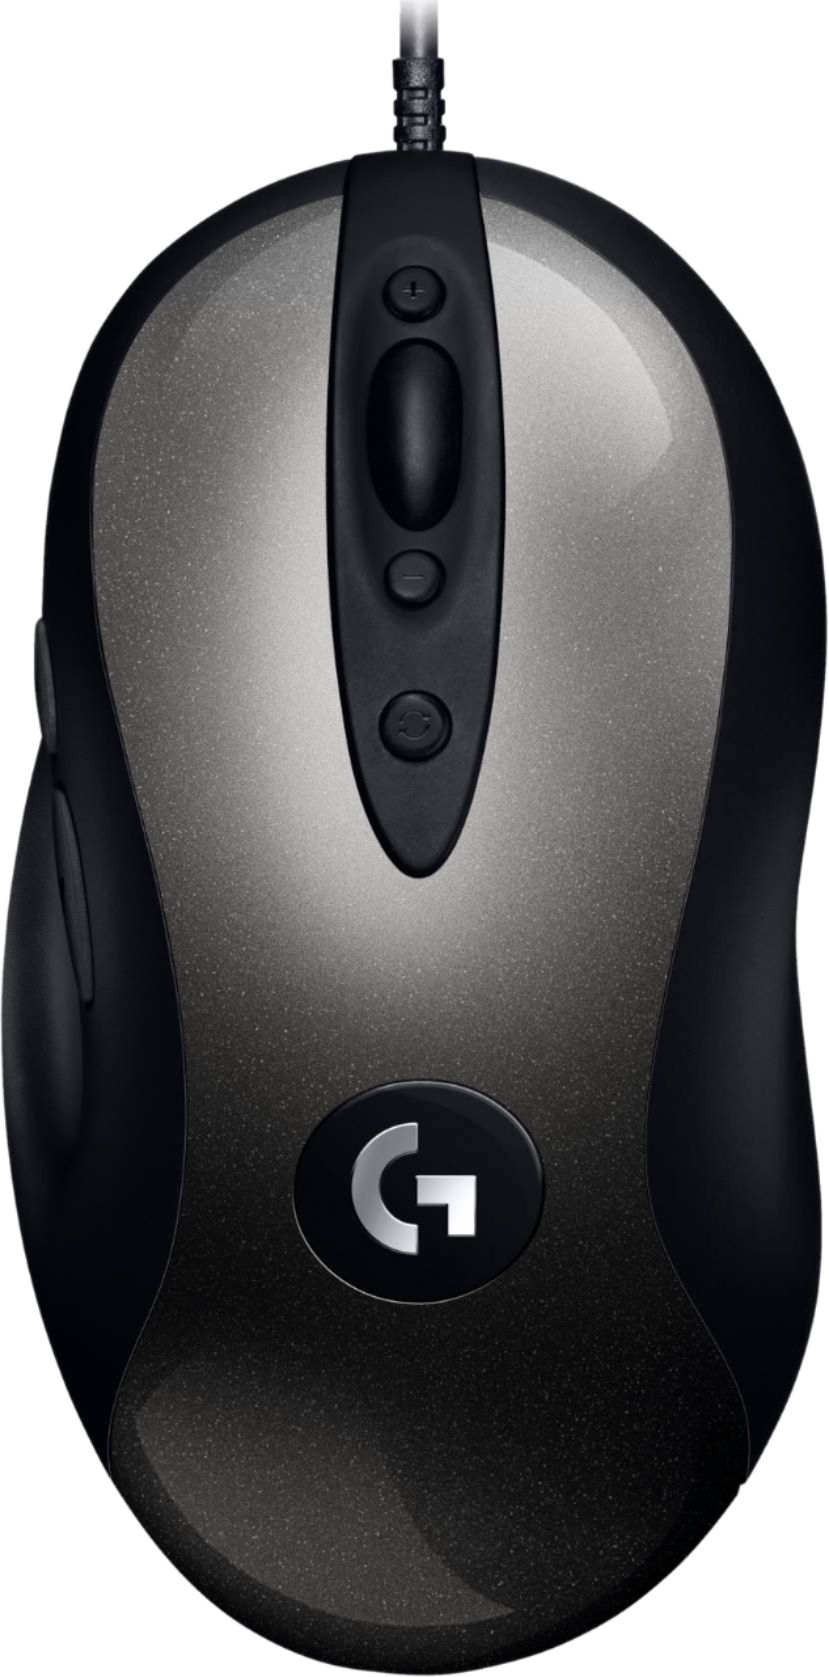 Logitech G MX518 Wired Optical Gaming Black/Gray 910-005542 - Best